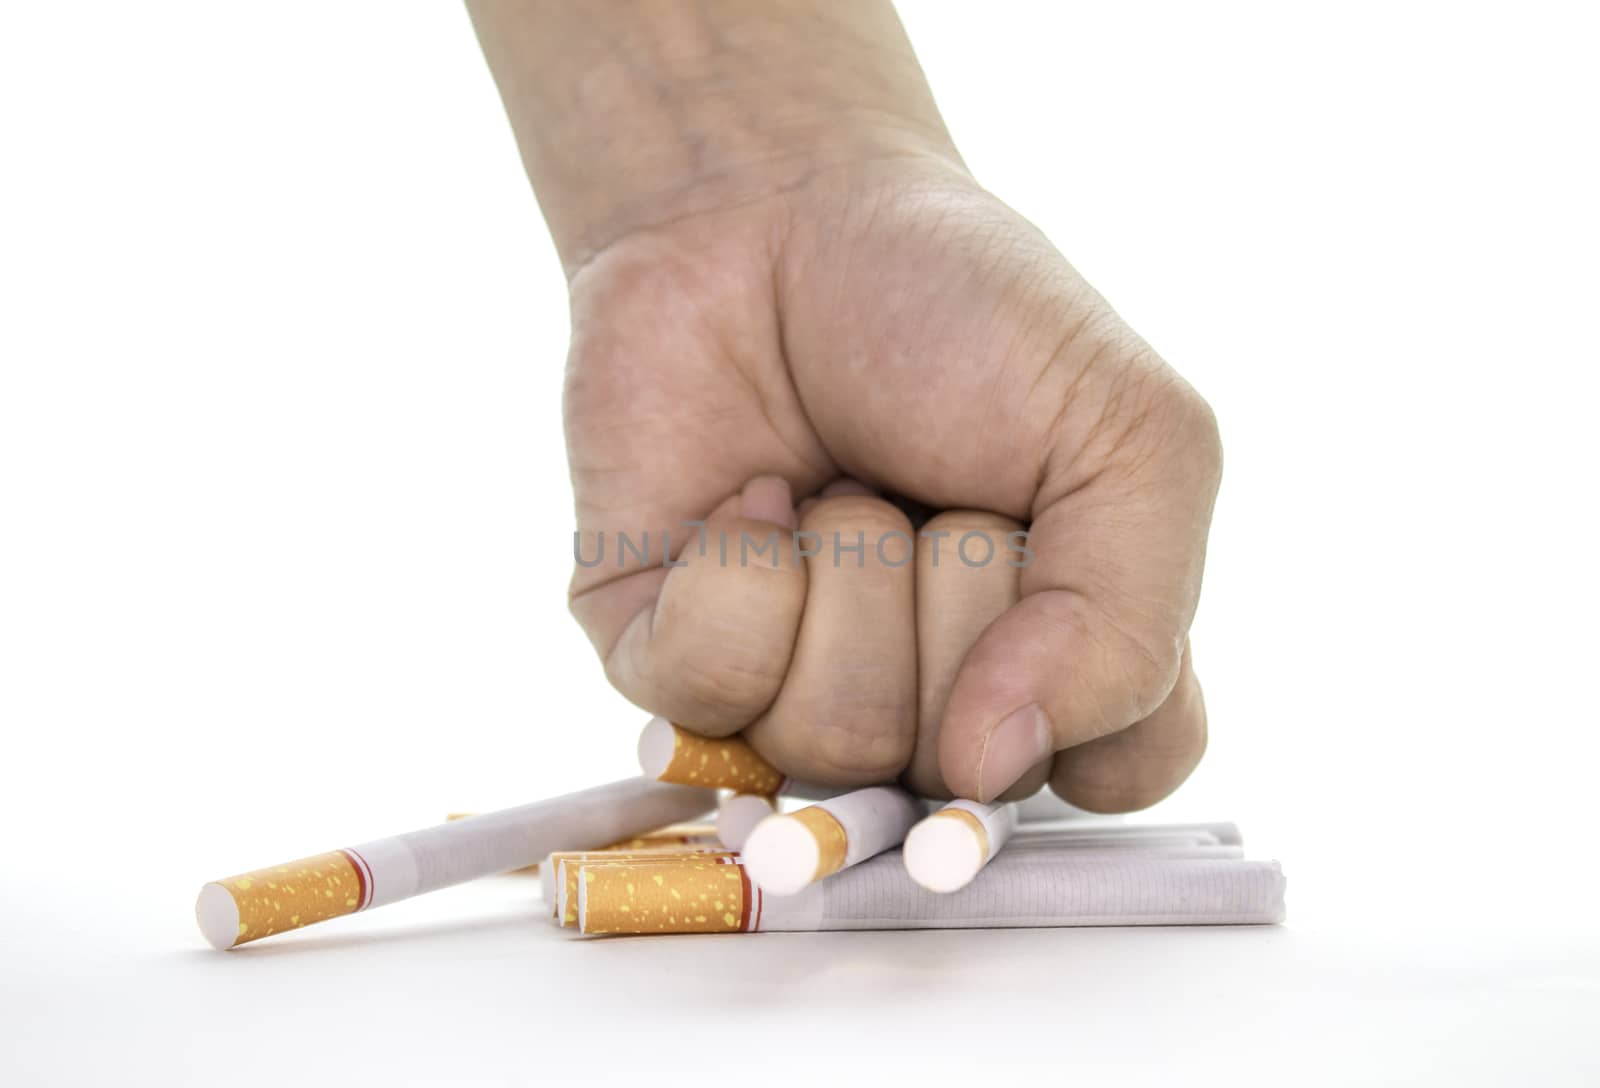 World No Tobacco Day; fist breaking cigarette - stop smoking concept on white background and space for text. by TEERASAK